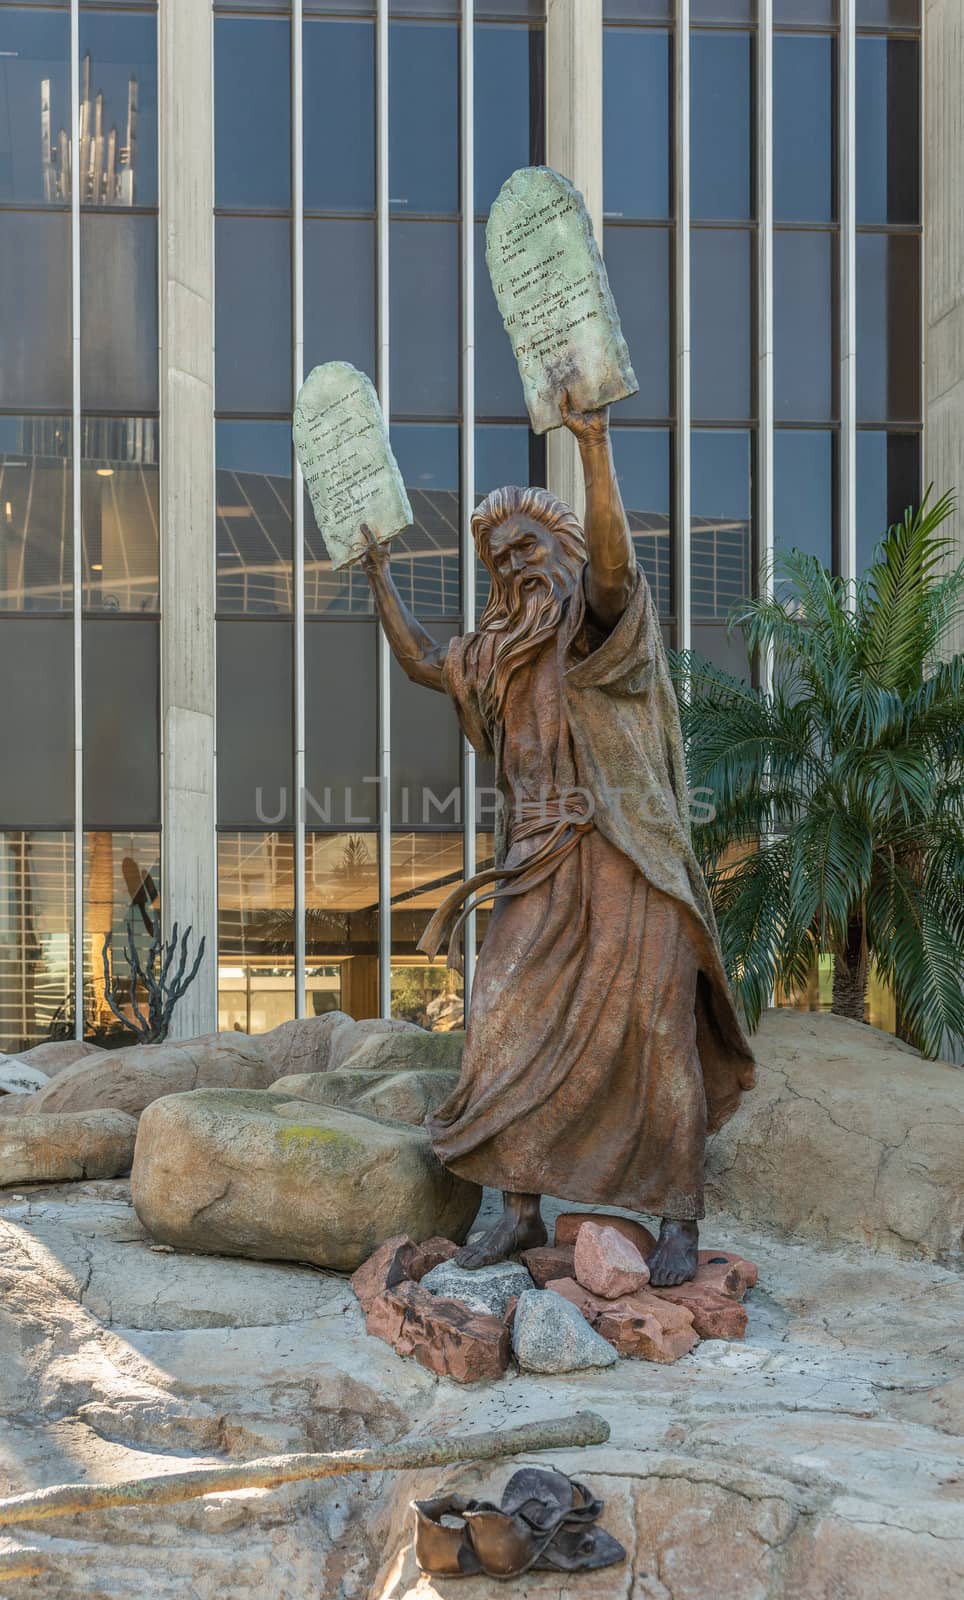 Statue of Moses at Christ Cathedral in Garden Grove, California. by Claudine